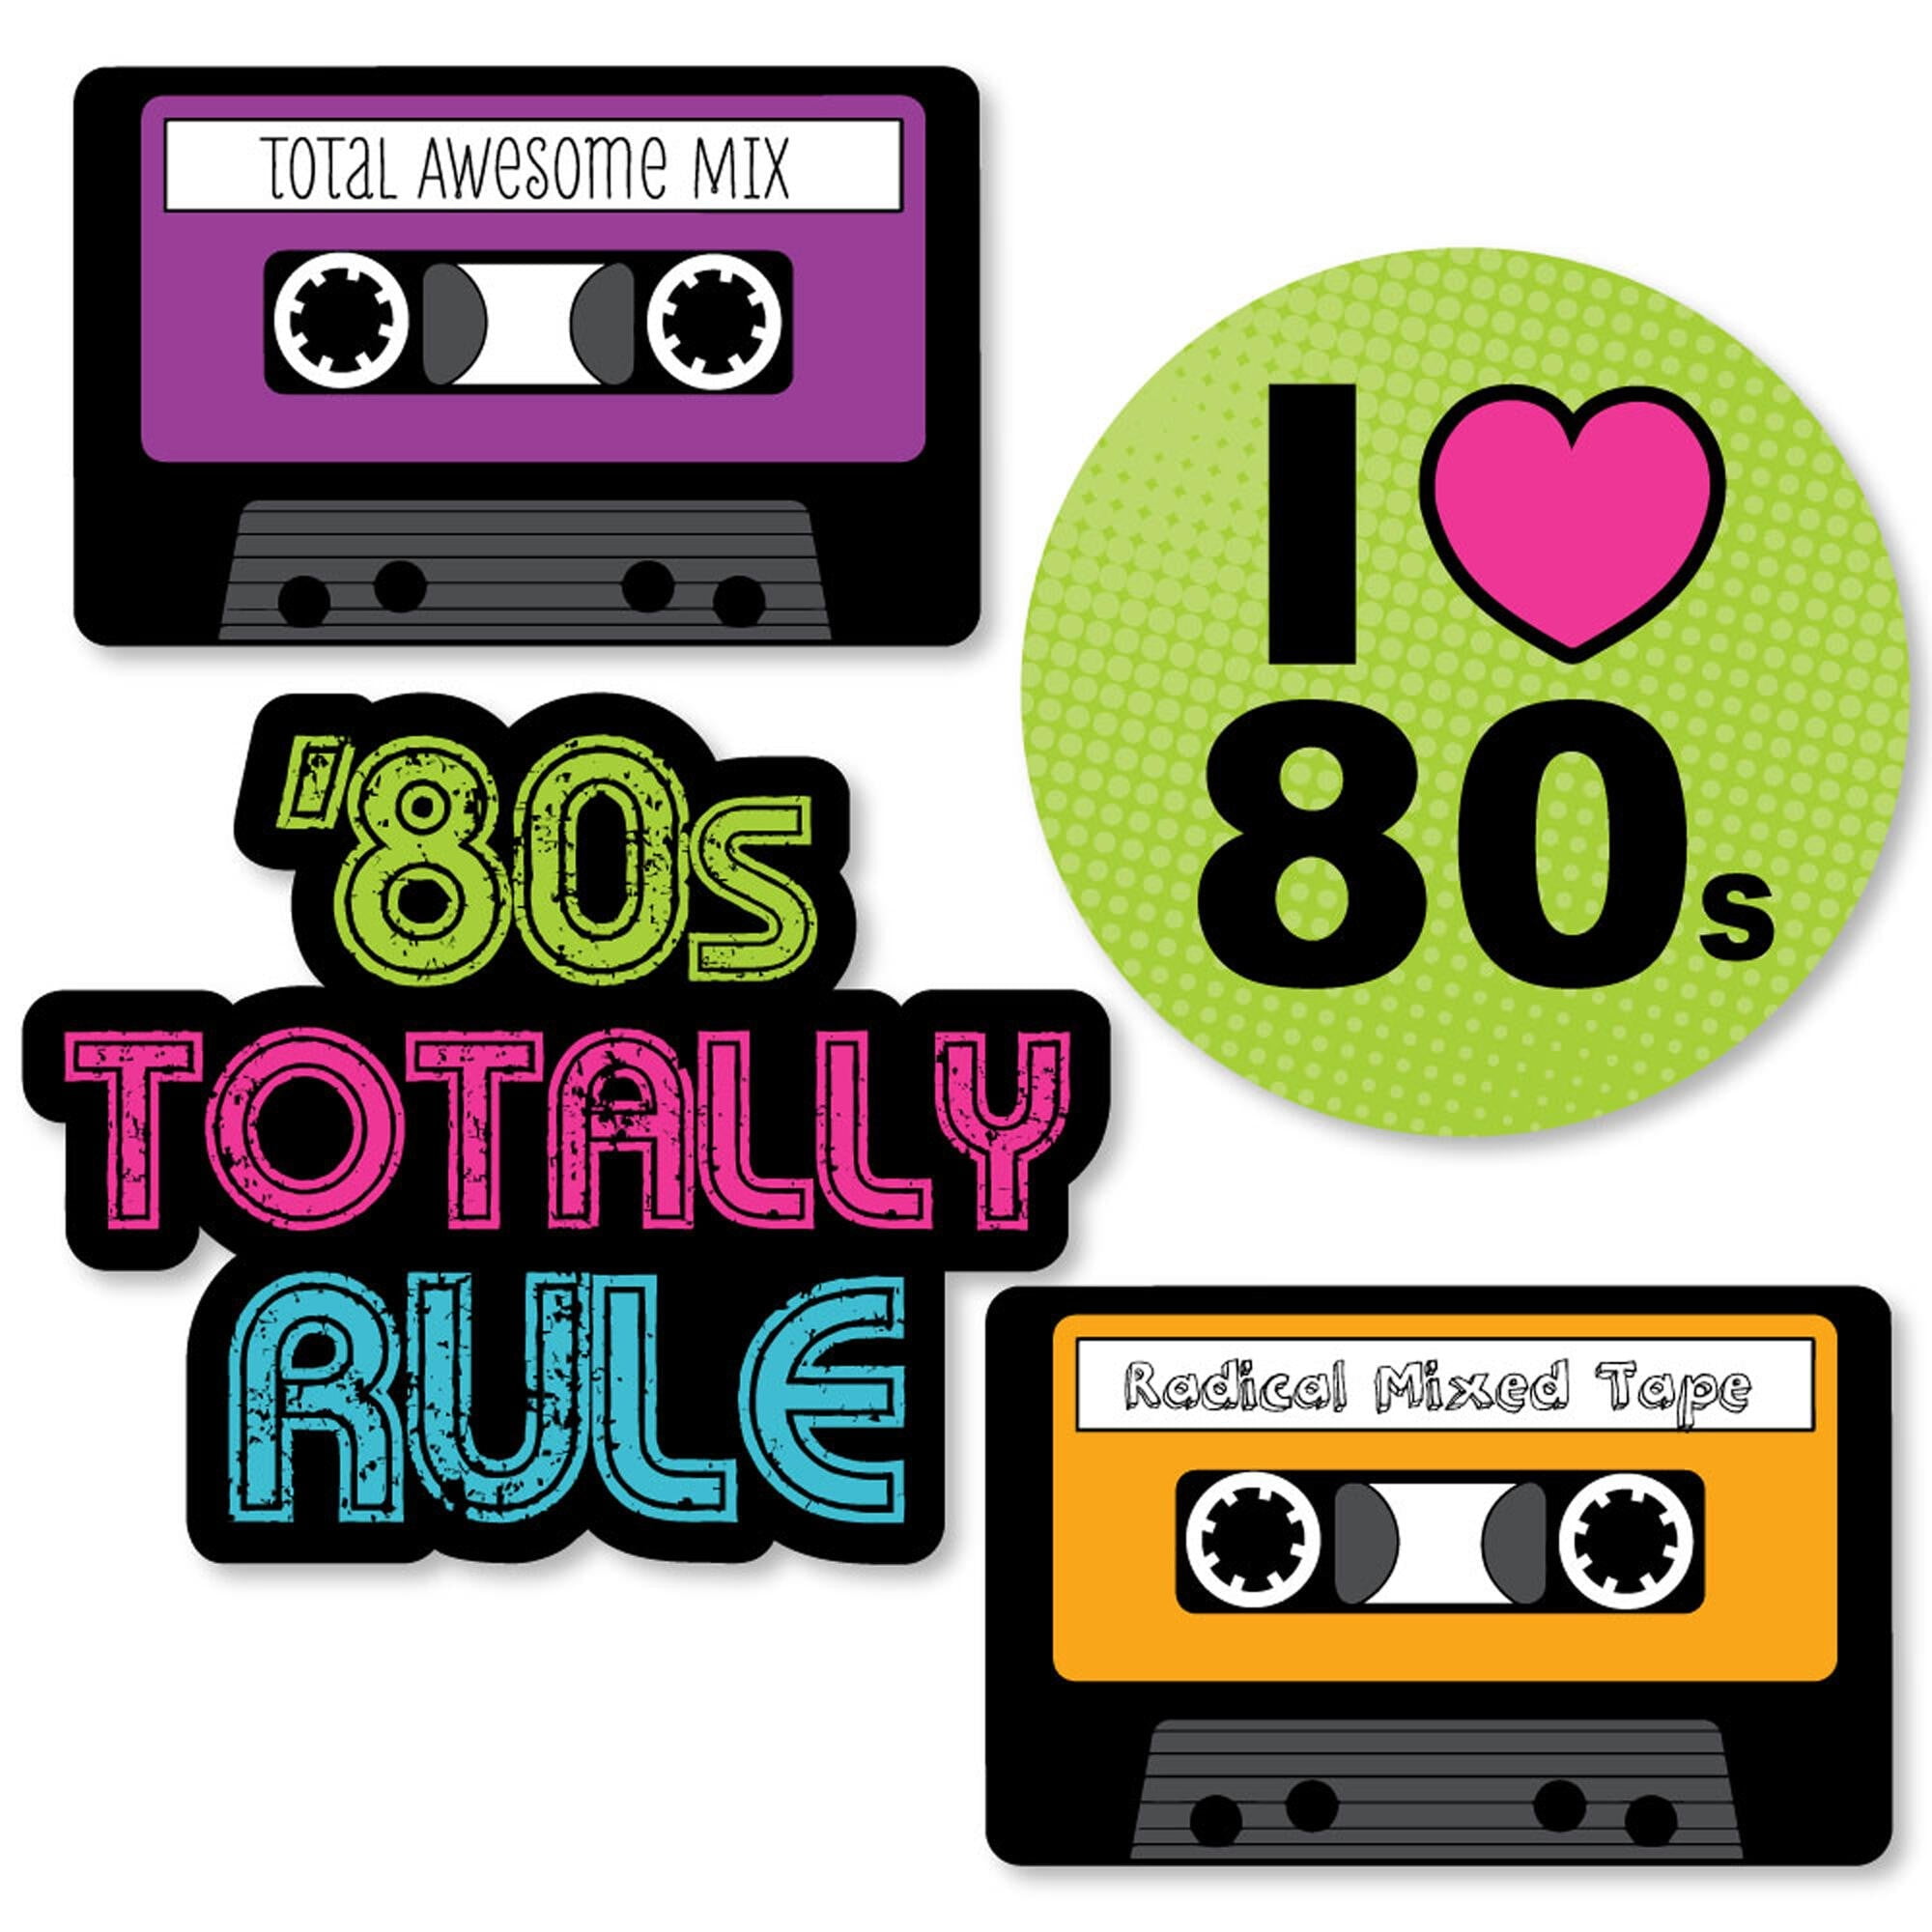 Totally Awesome 80's Birthday Party Invitation, Eighties